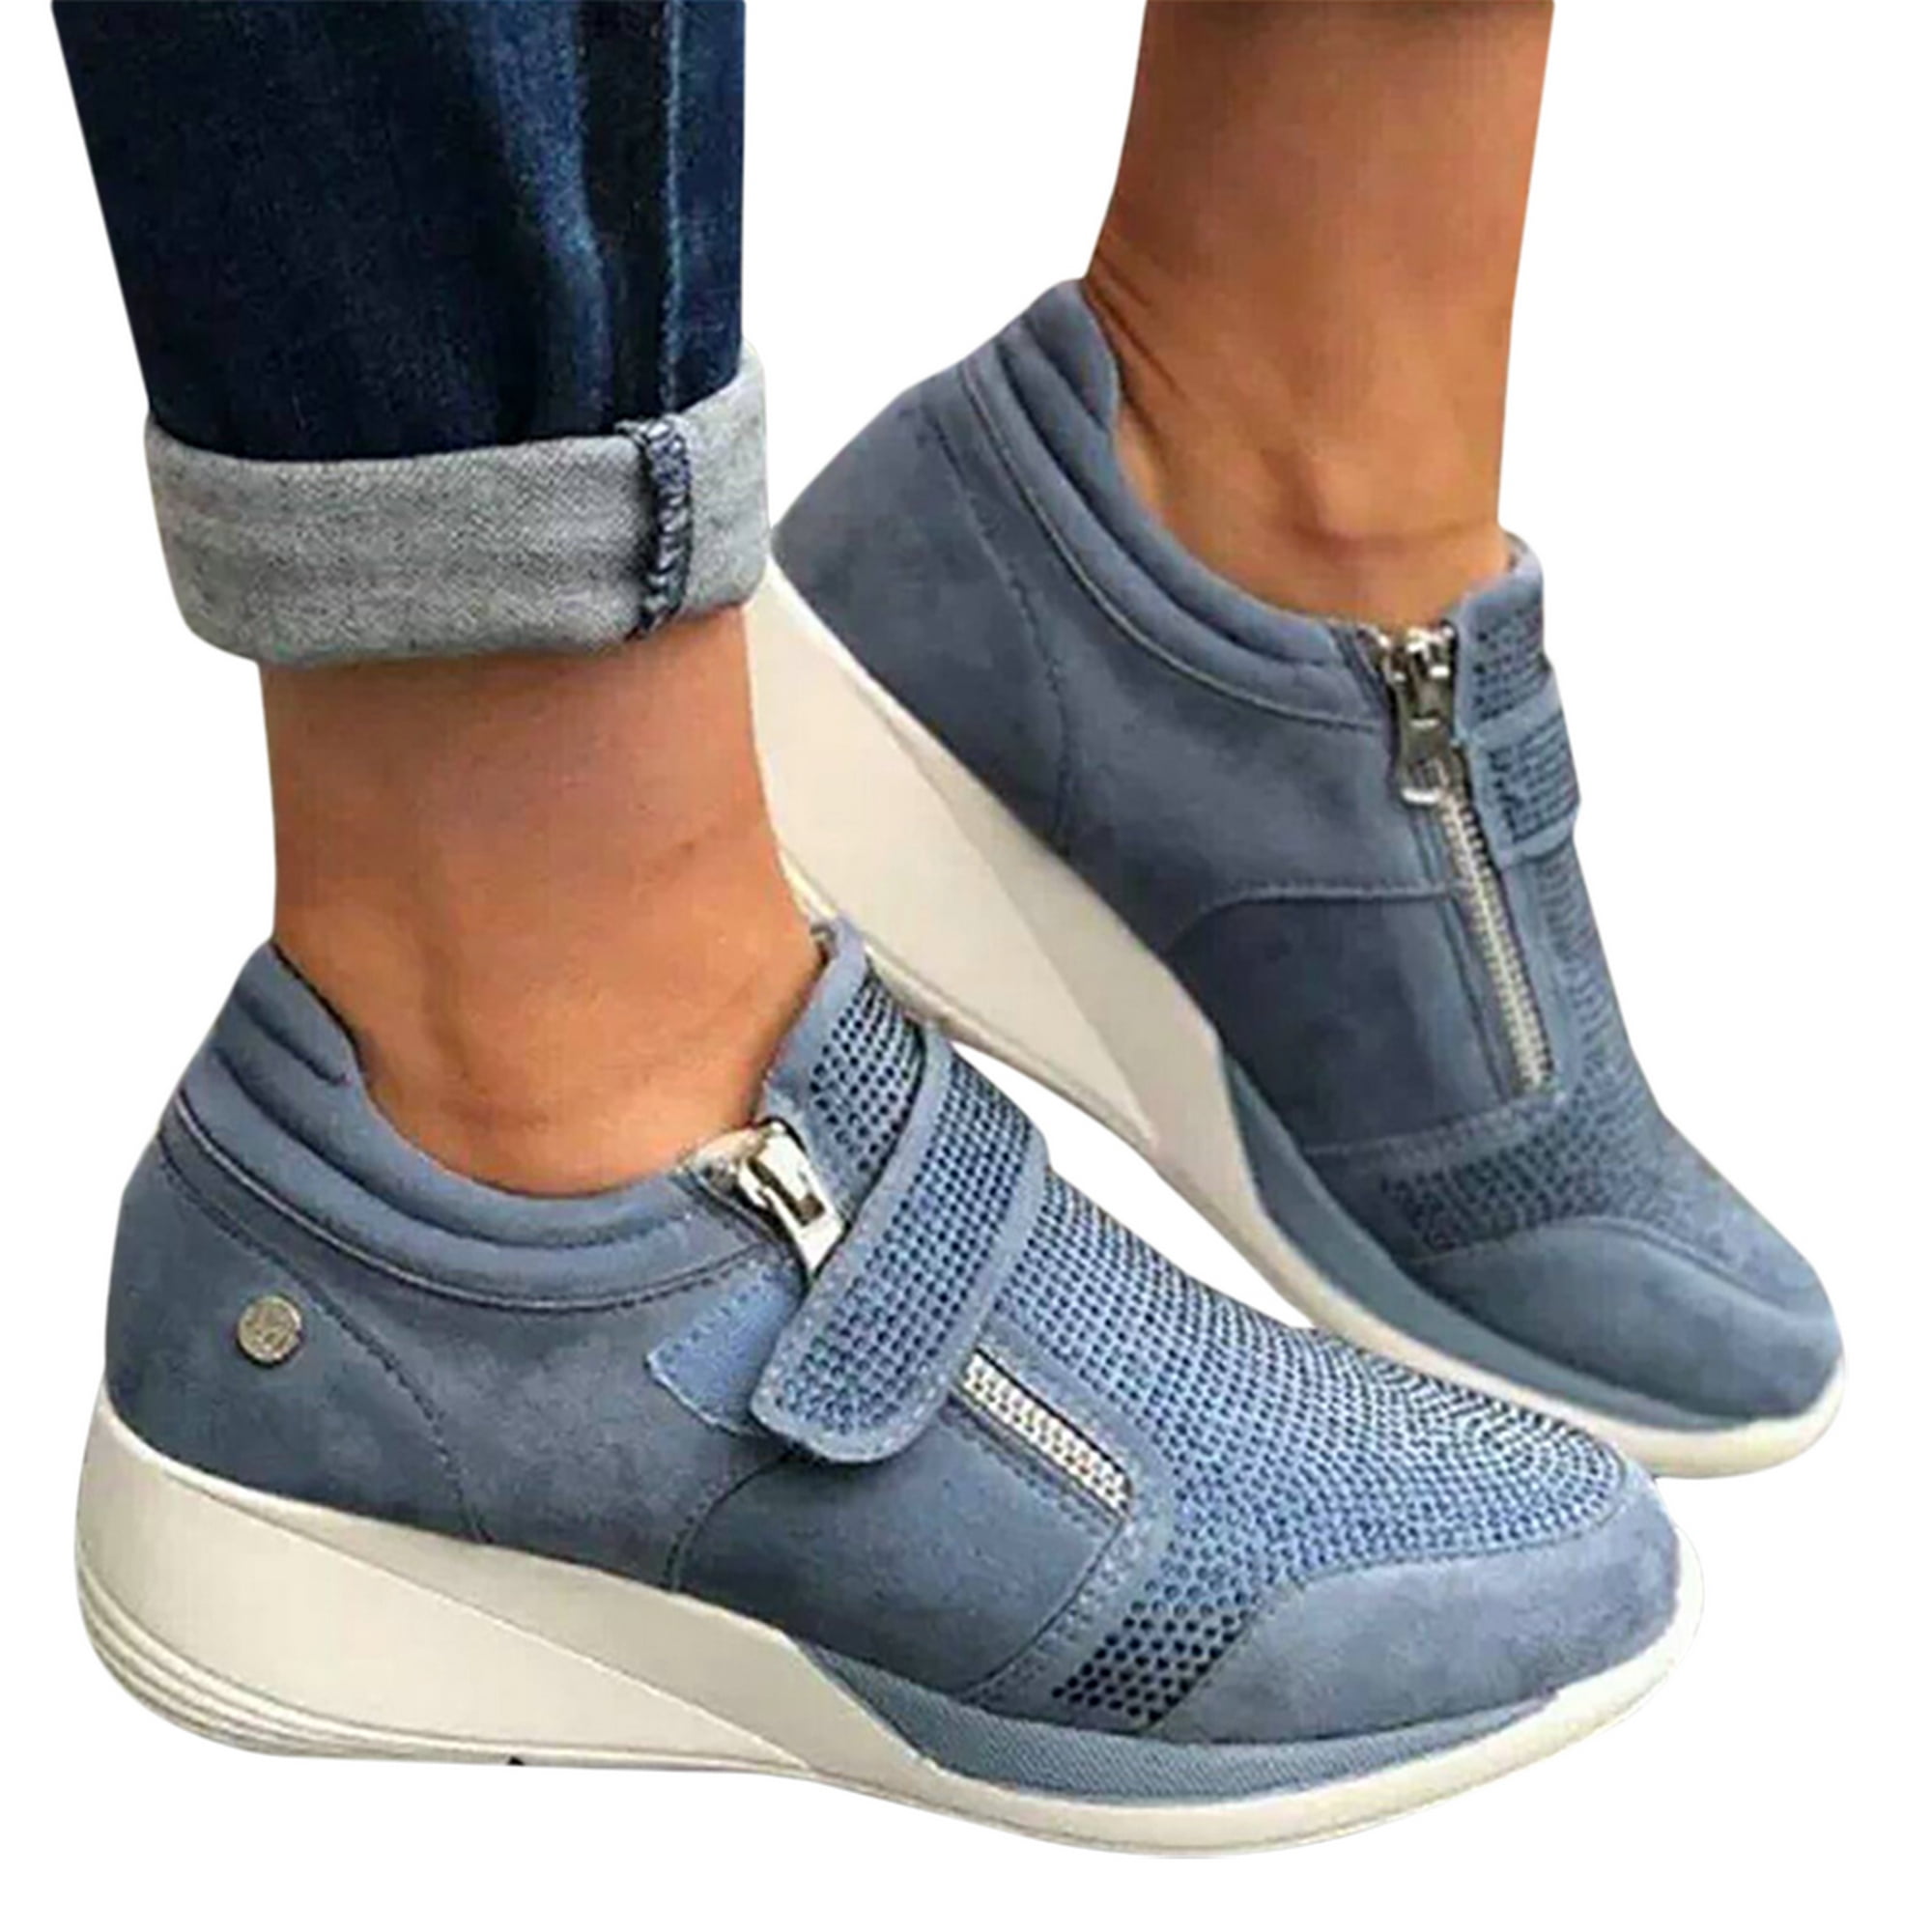 Women‘s Sneakers Sports Gym Fitness Casual Trainers Casual Running Wedge Shoes 